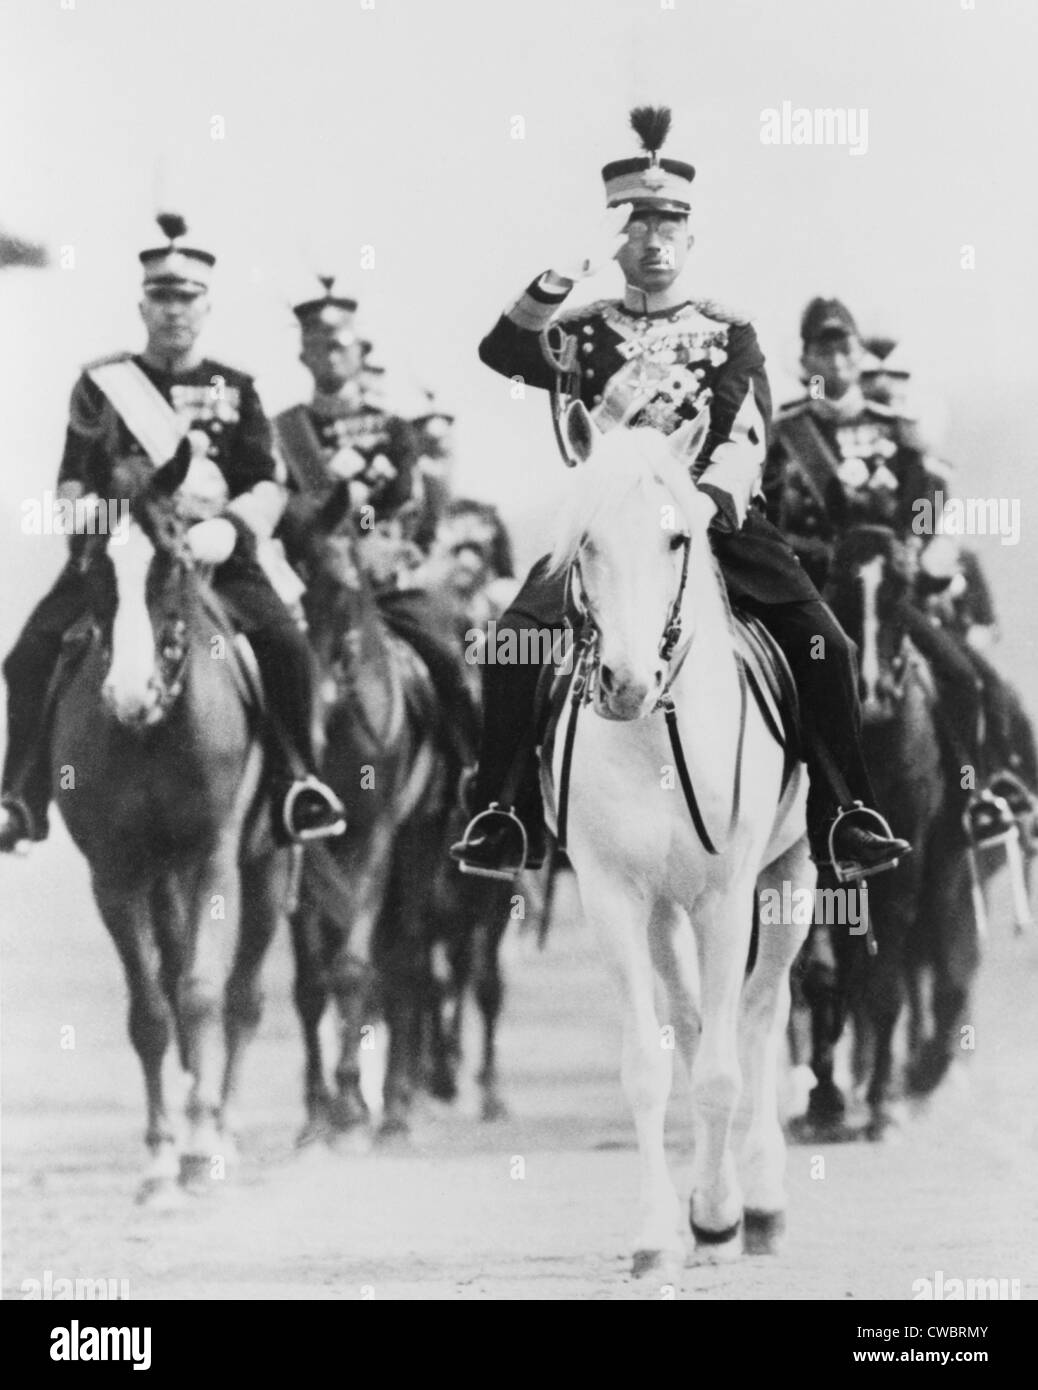 Japan's Emperor Hirohito, saluting on horseback, in military uniform, with group of Japanese officers. Ca. 1940. Stock Photo